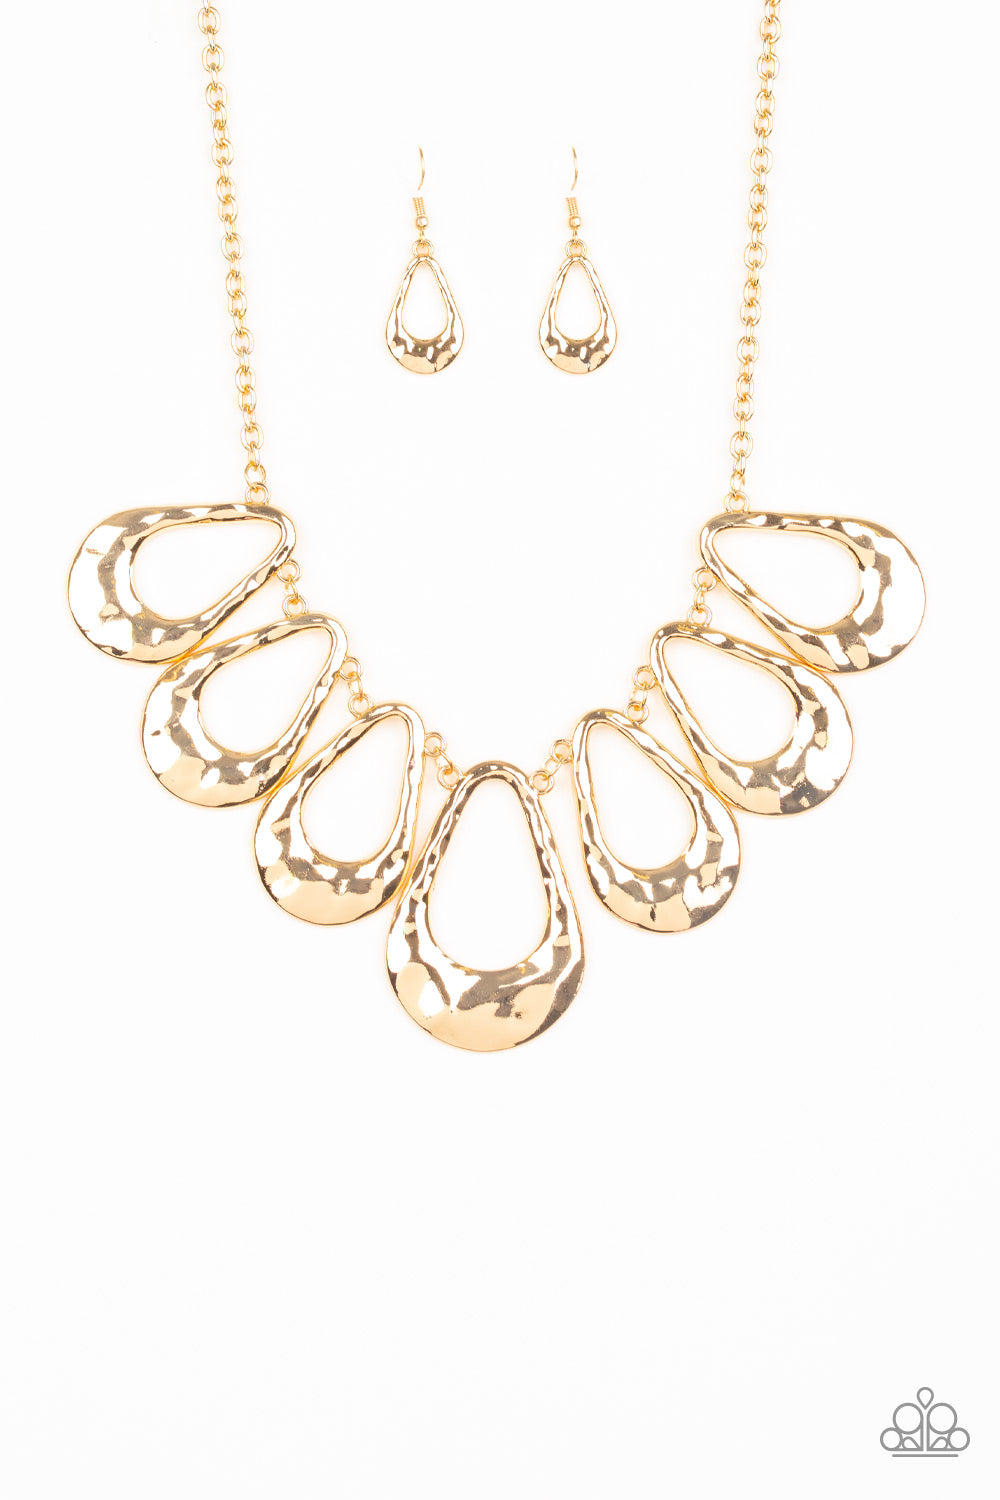 Teardrop Envy - Gold Necklace - TheMasterCollection